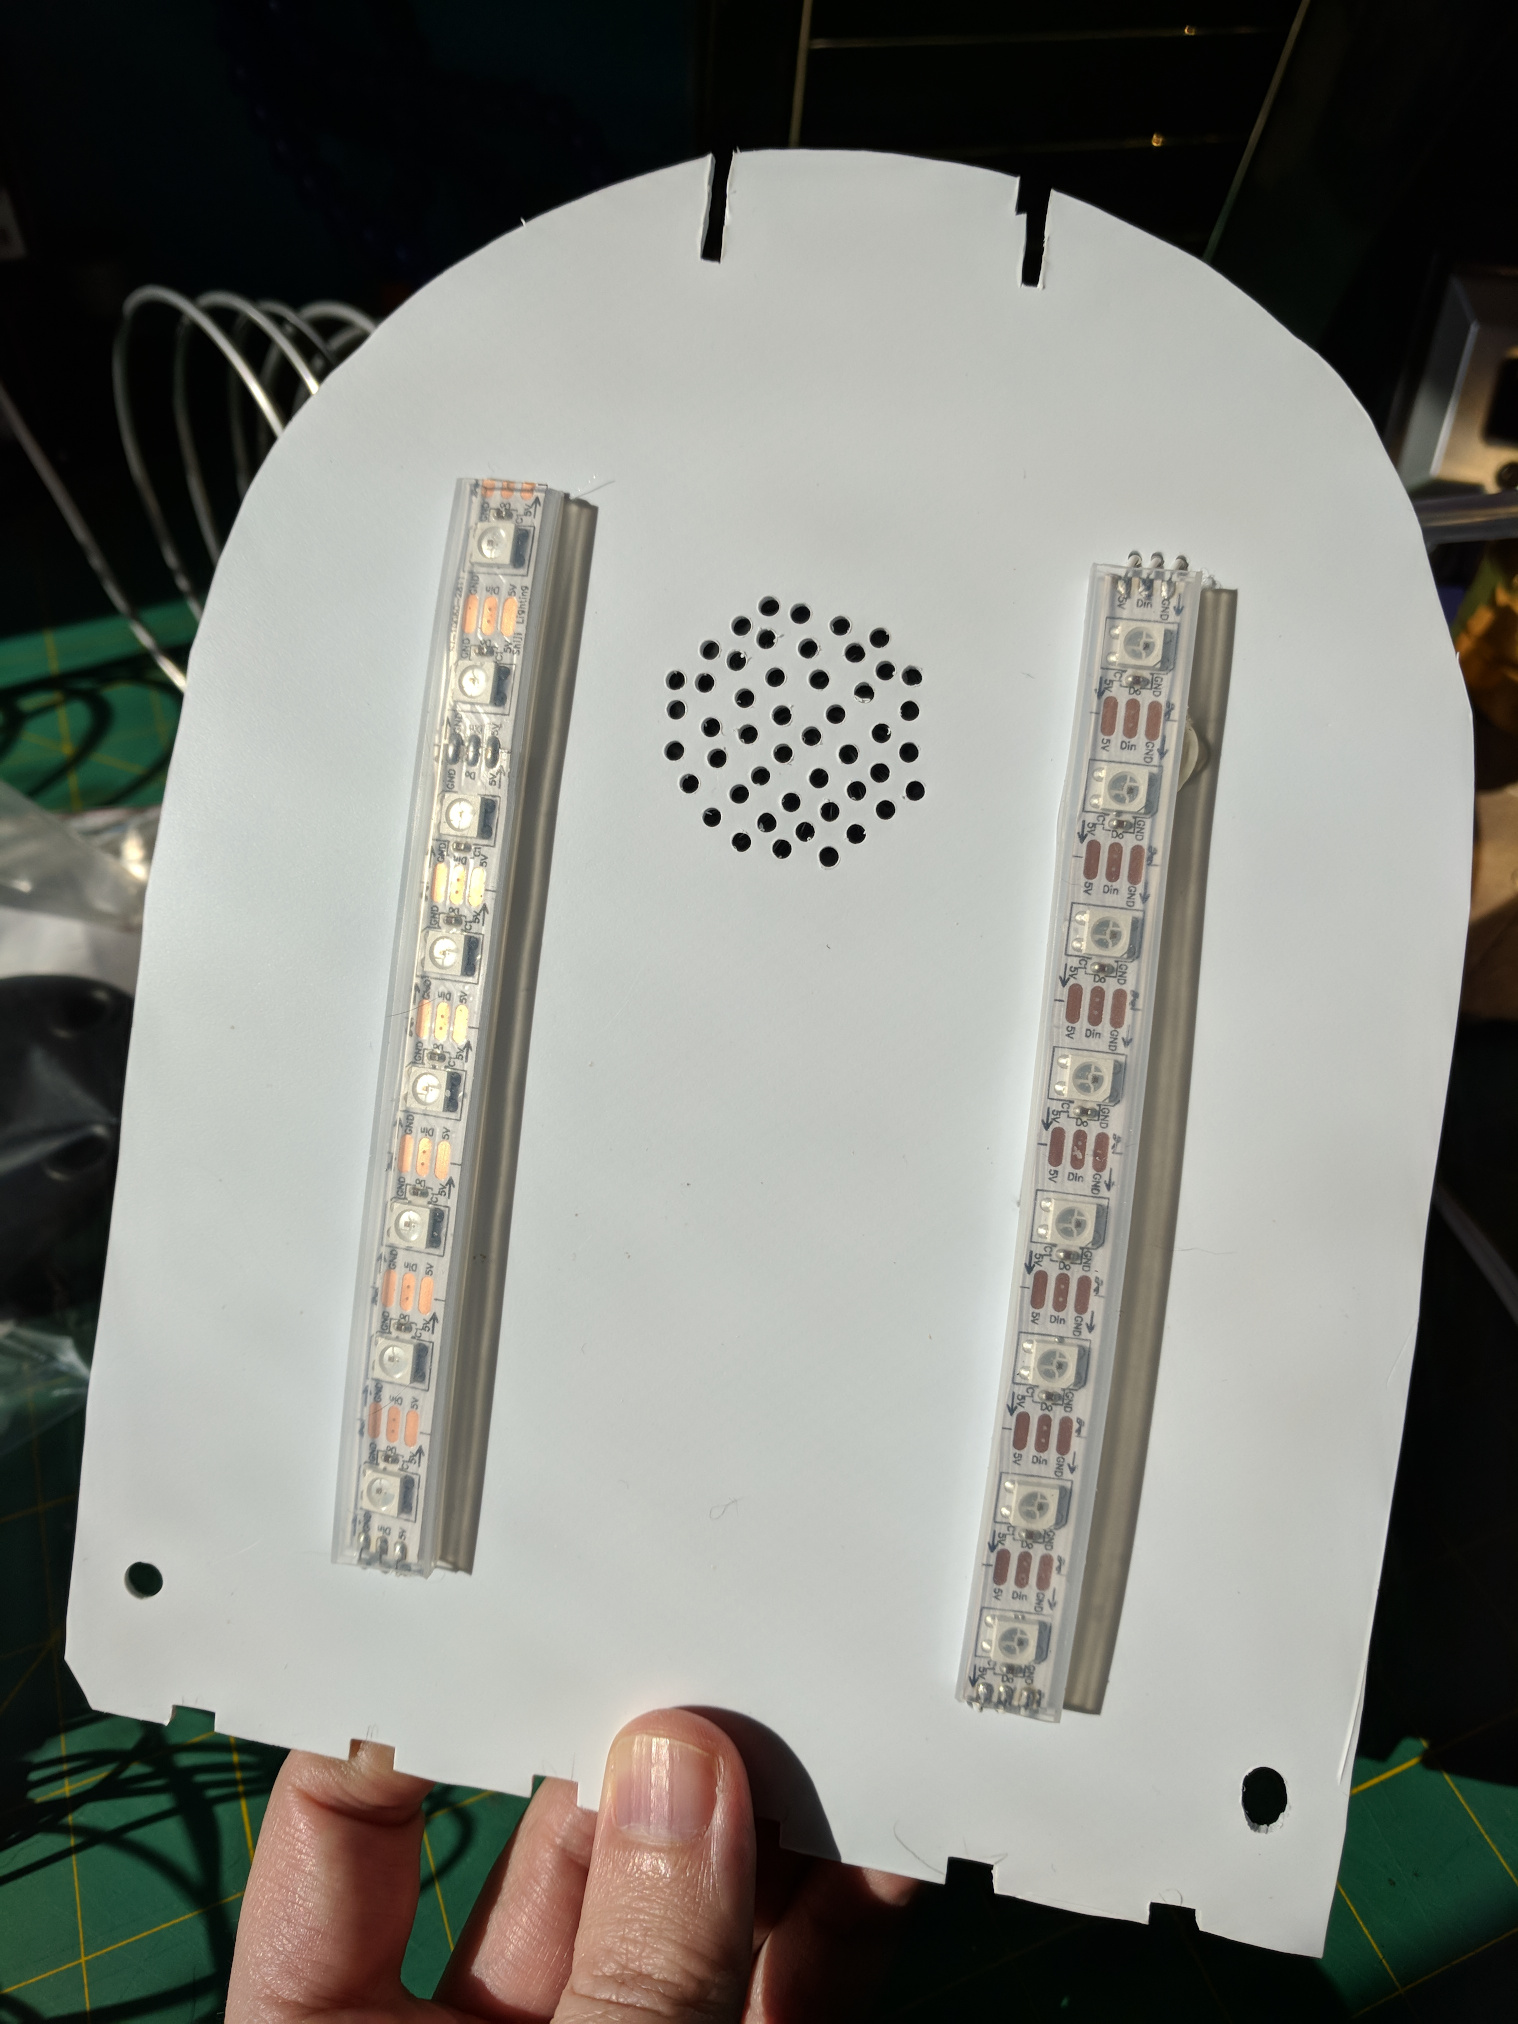 Polystyrine cut in the shape of a mailbox cross-section with mounted LEDs and small holes to form a speaker grille.